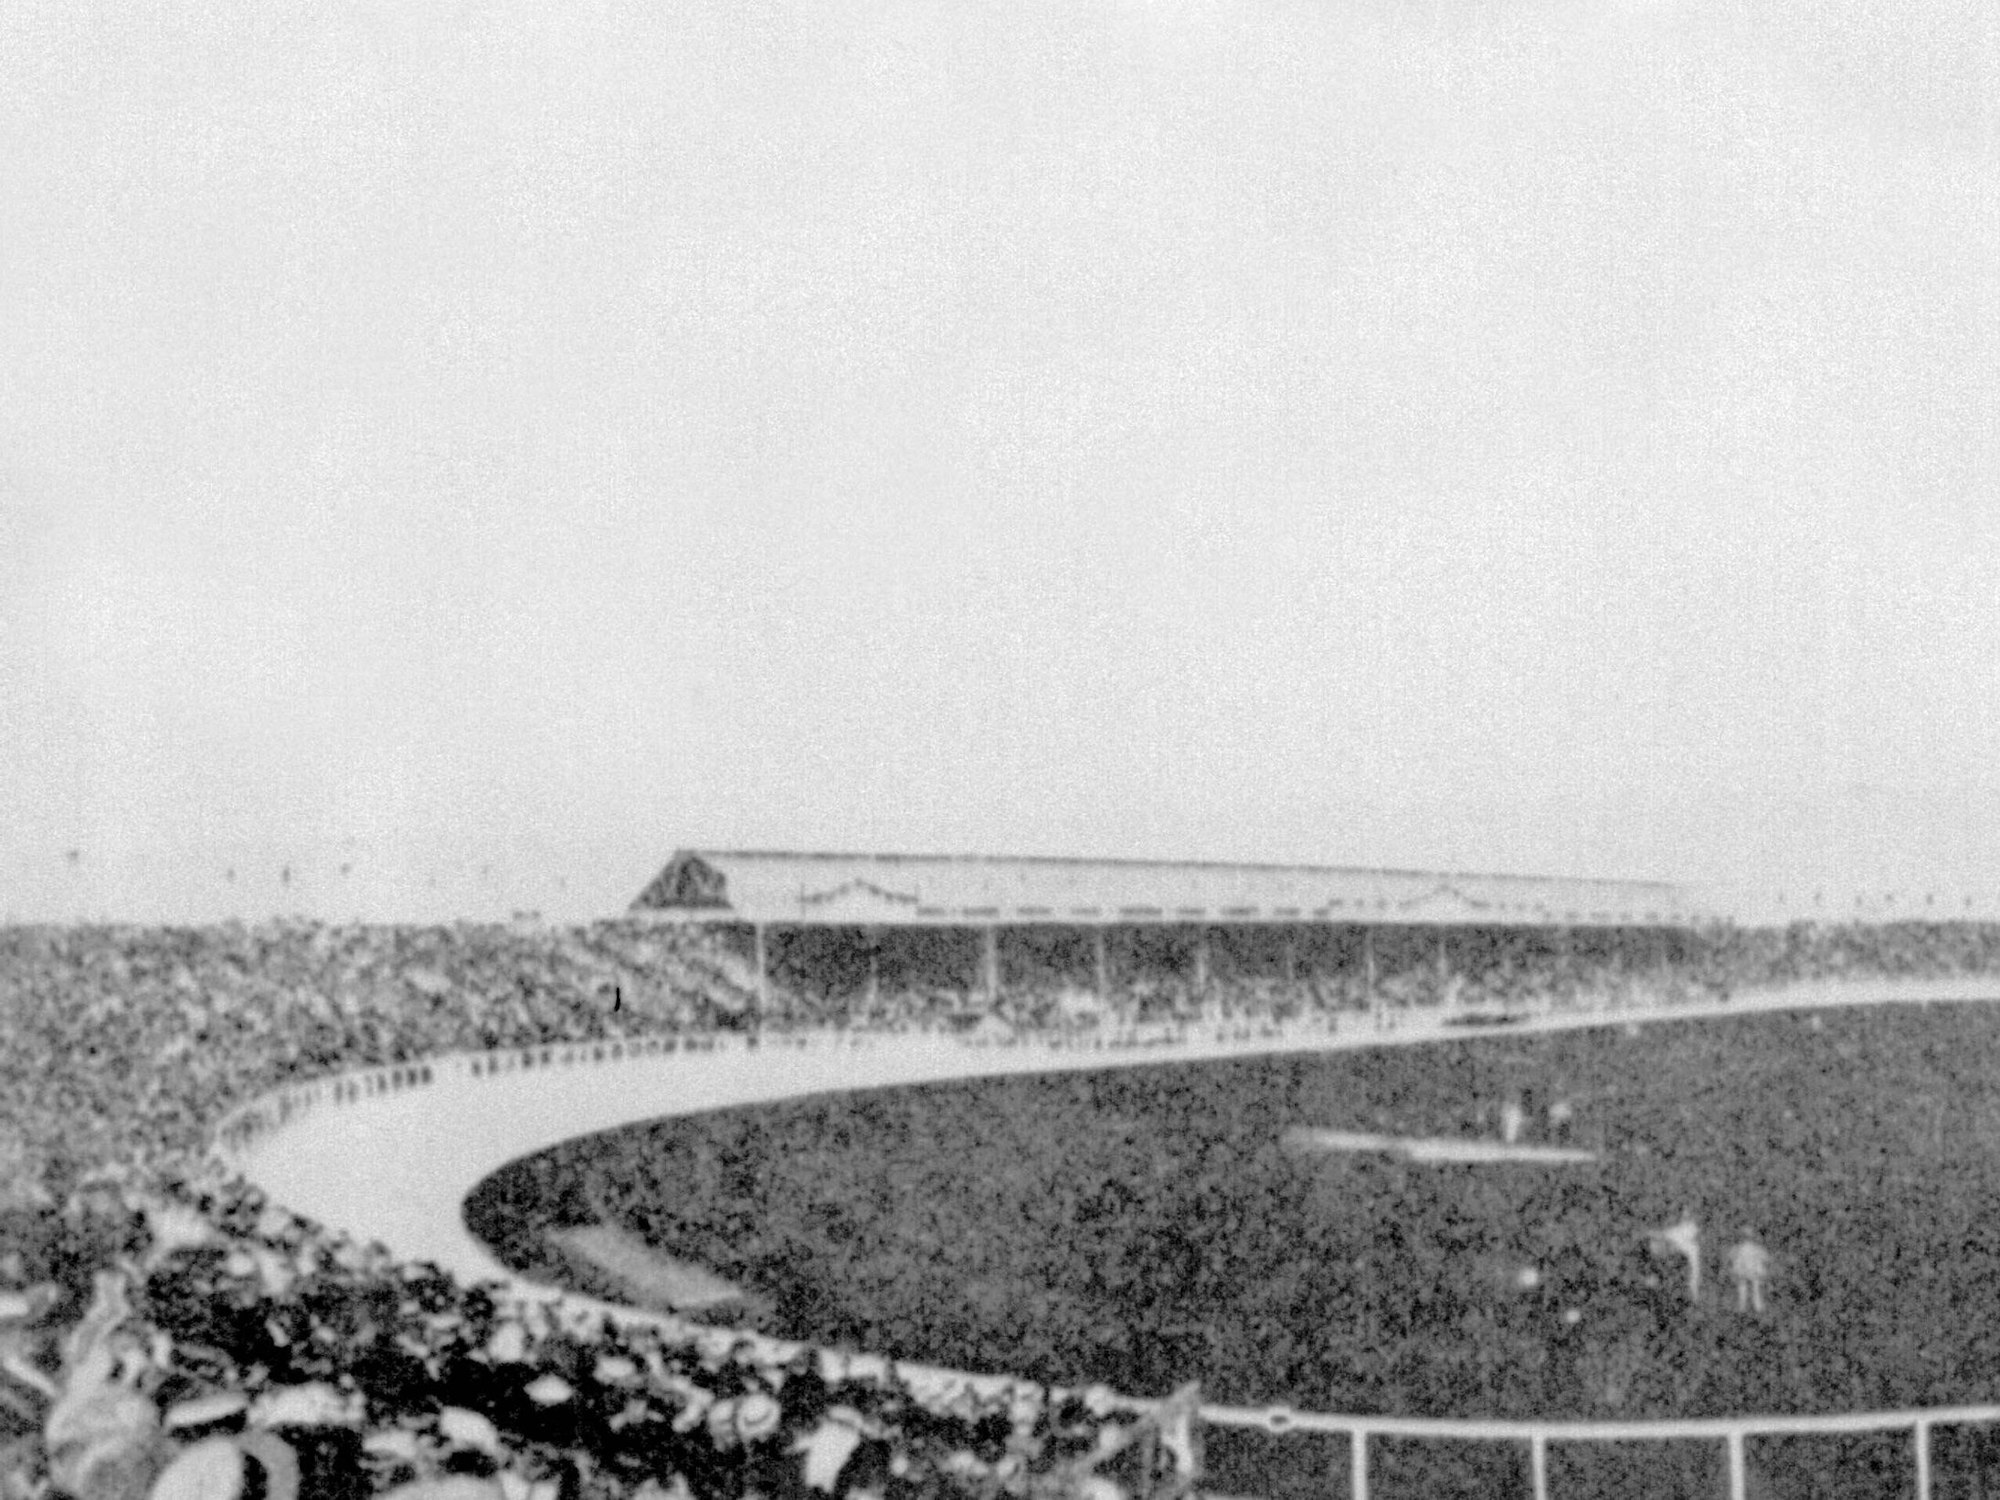 Das Olympia-Stadion in London